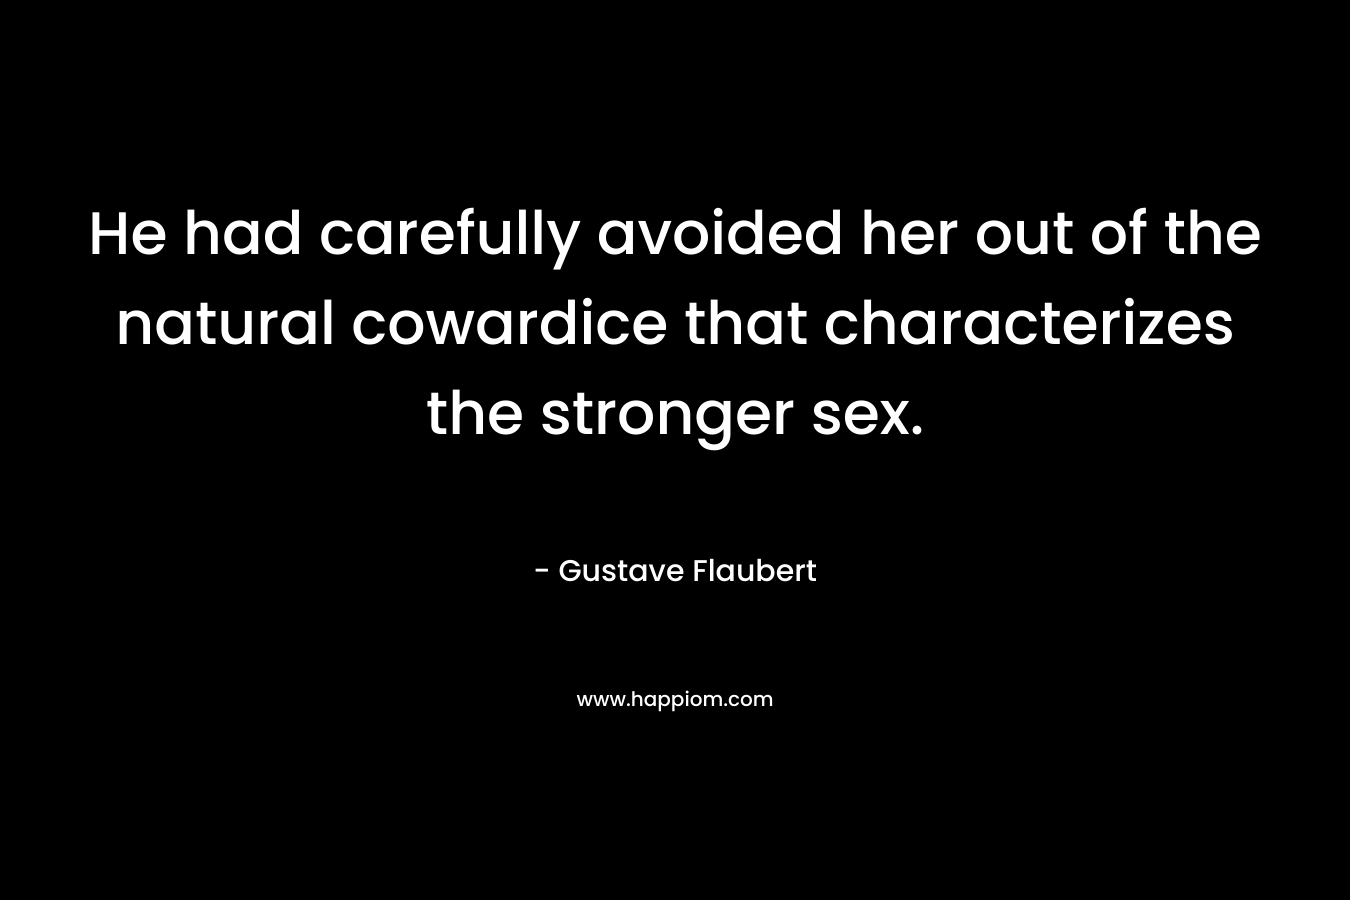 He had carefully avoided her out of the natural cowardice that characterizes the stronger sex.